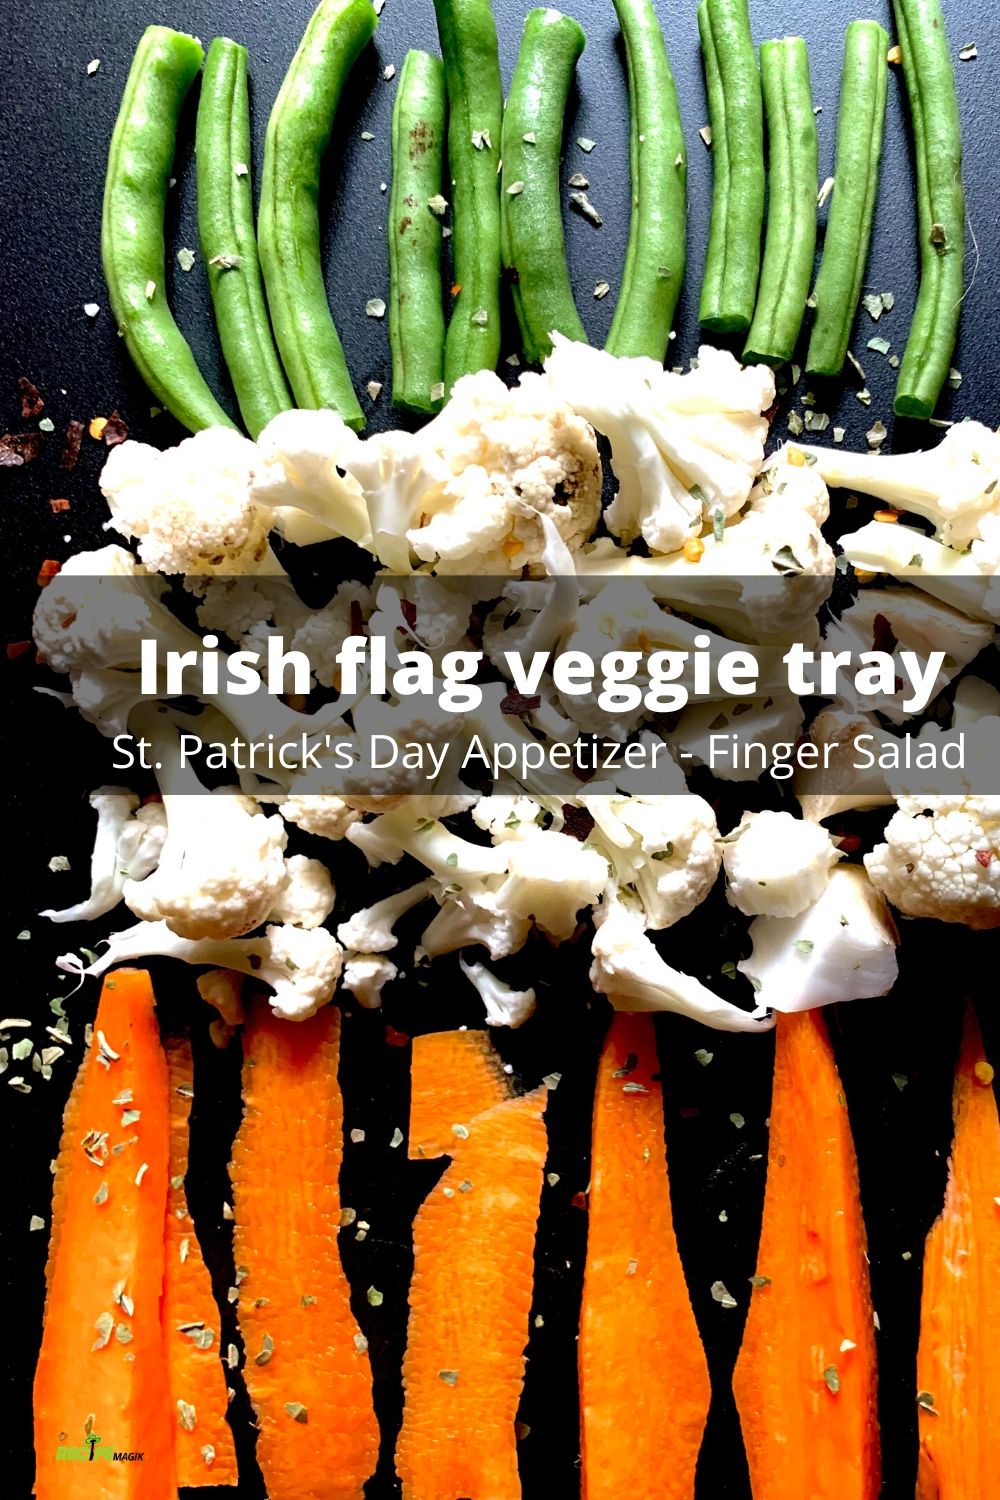 st patricks day appetizers